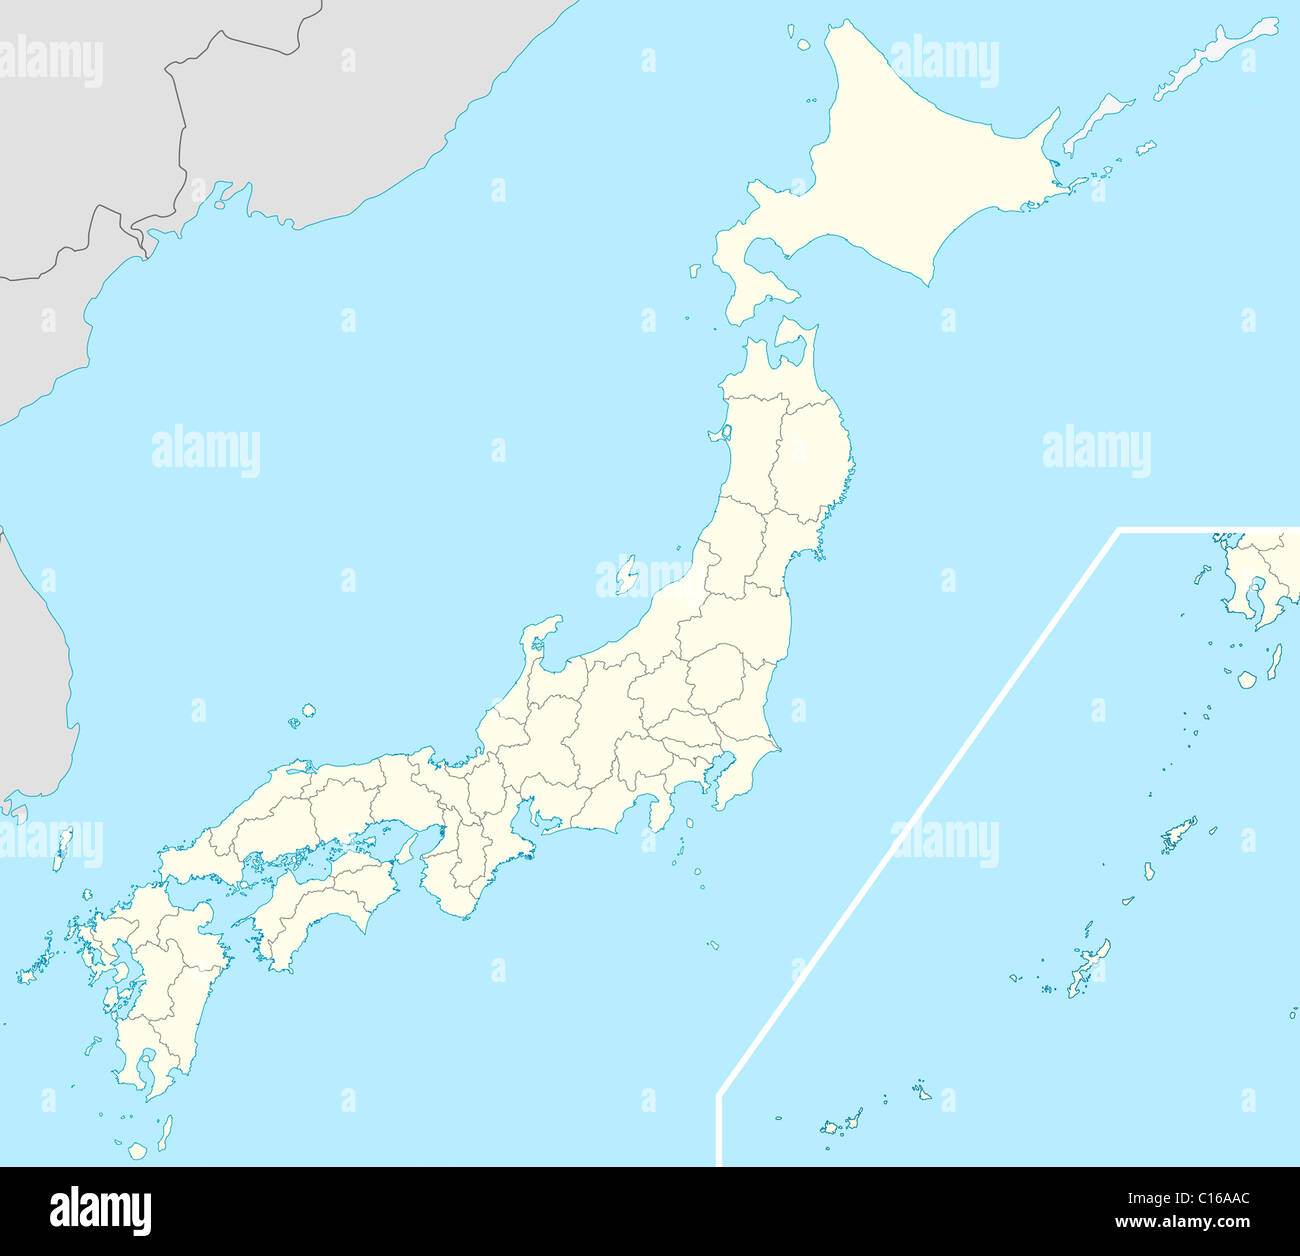 Illustrated map of country of Japan with states marked. Stock Photo